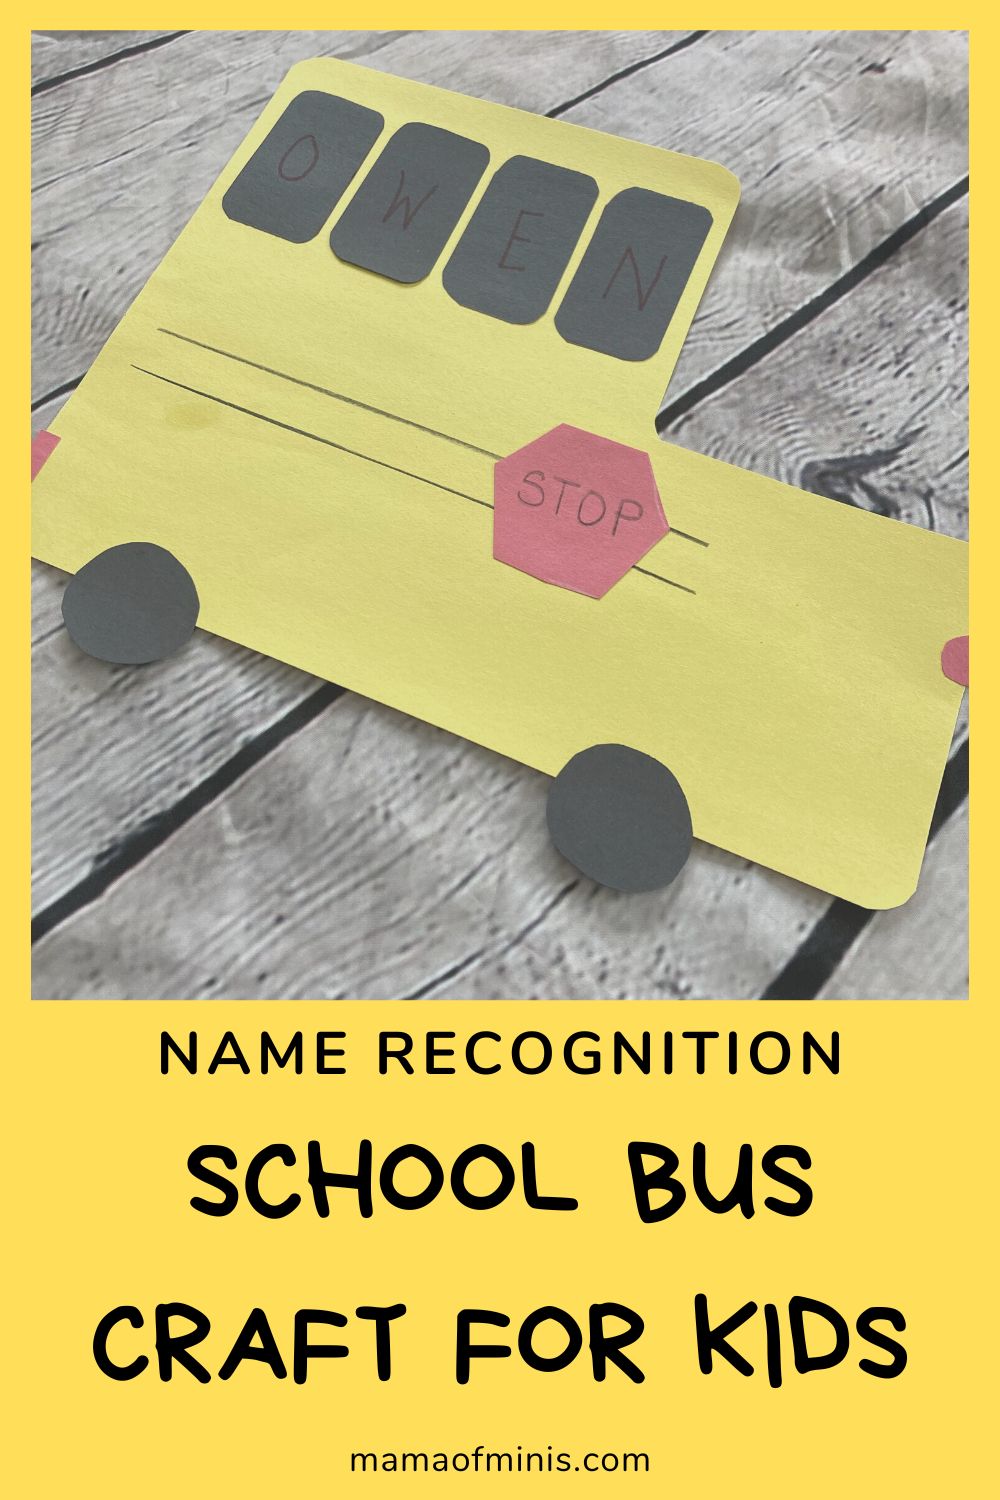 Name Recognition School Bus Craft for Kids